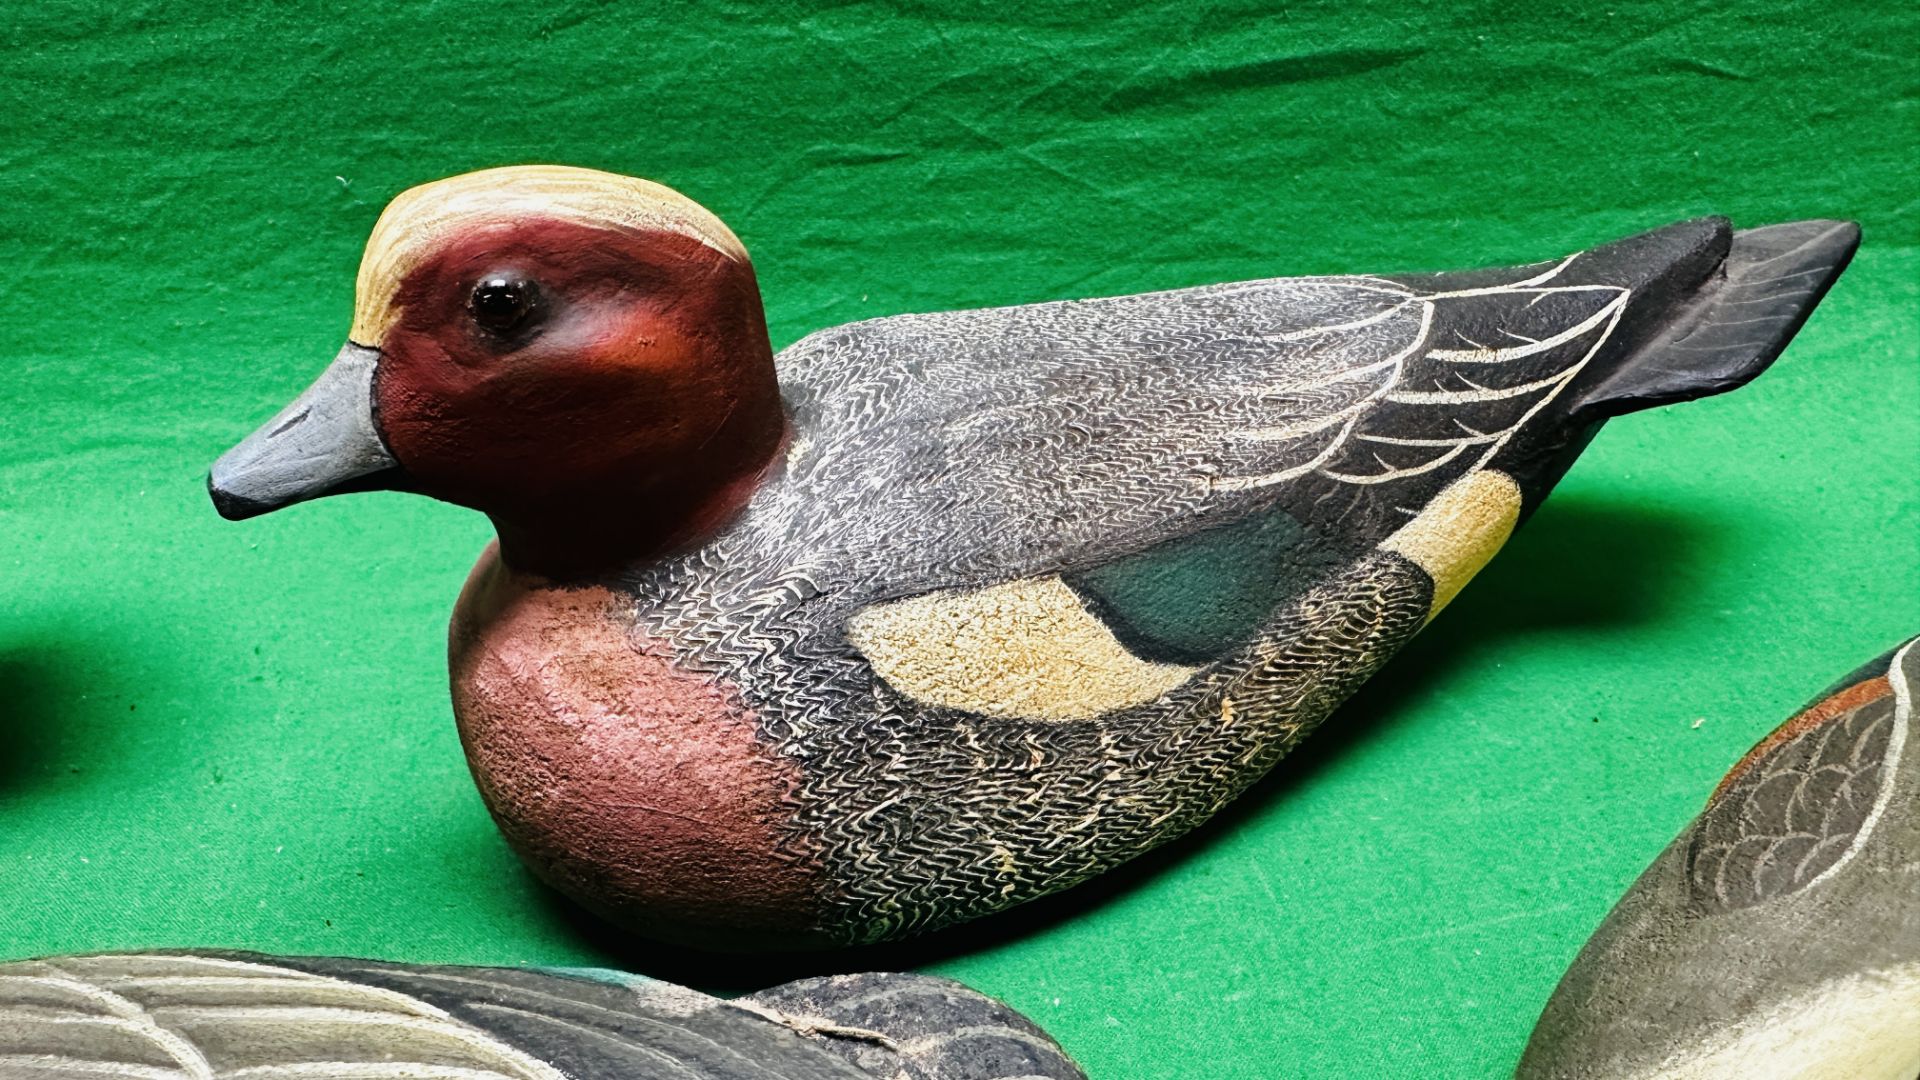 A HANDCRAFTED SET OF 4 DUCK DECOYS HAVING HANDPAINTED DETAIL AND GLASS EYES. - Image 6 of 13